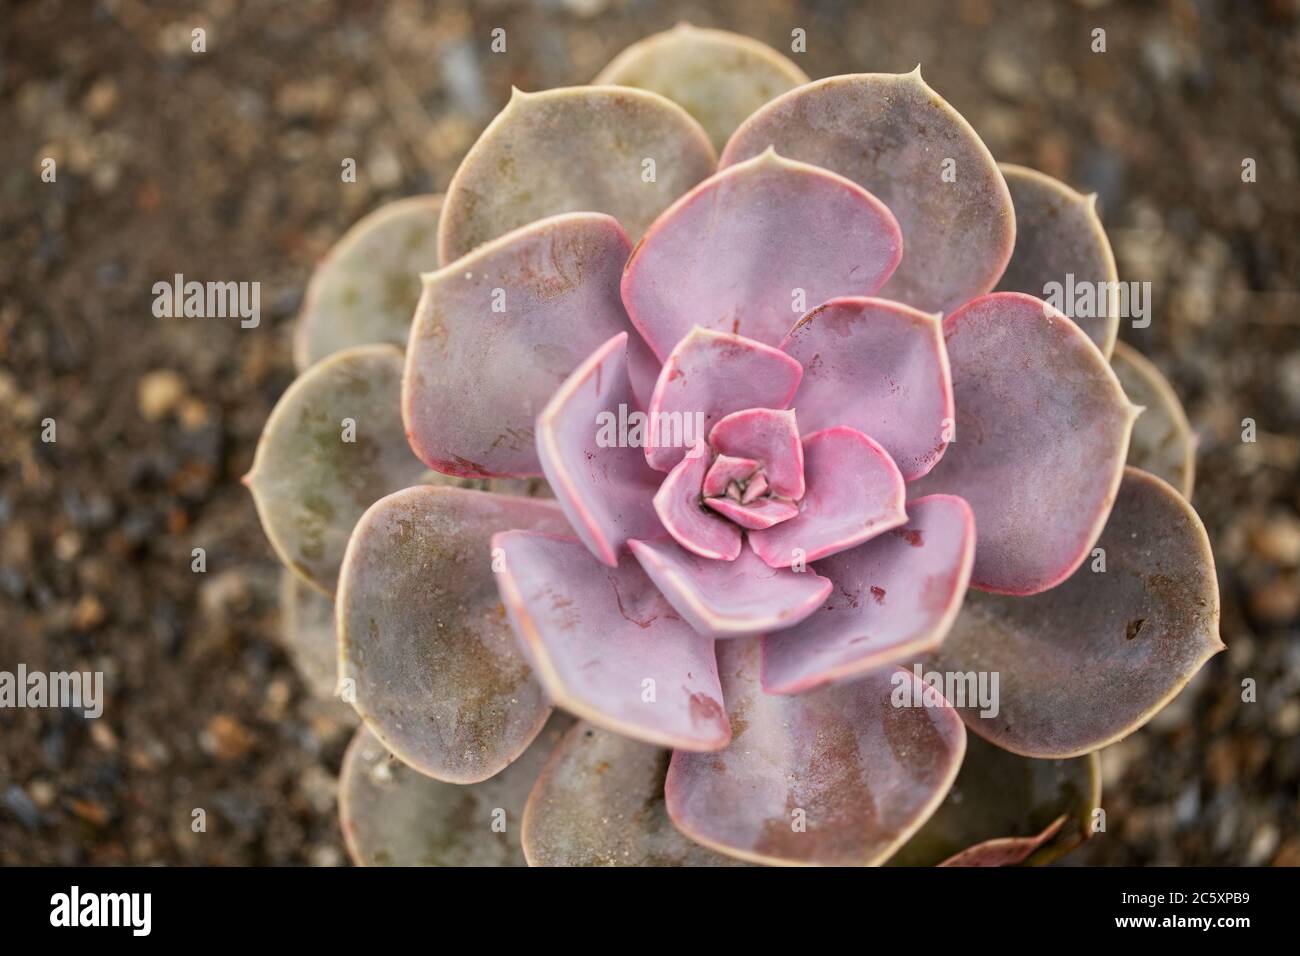 Echeveria, in the family Crassulaceae, native to Central America, Mexico and northwestern South America. This is the variety Perle von Nurnberg. Stock Photo